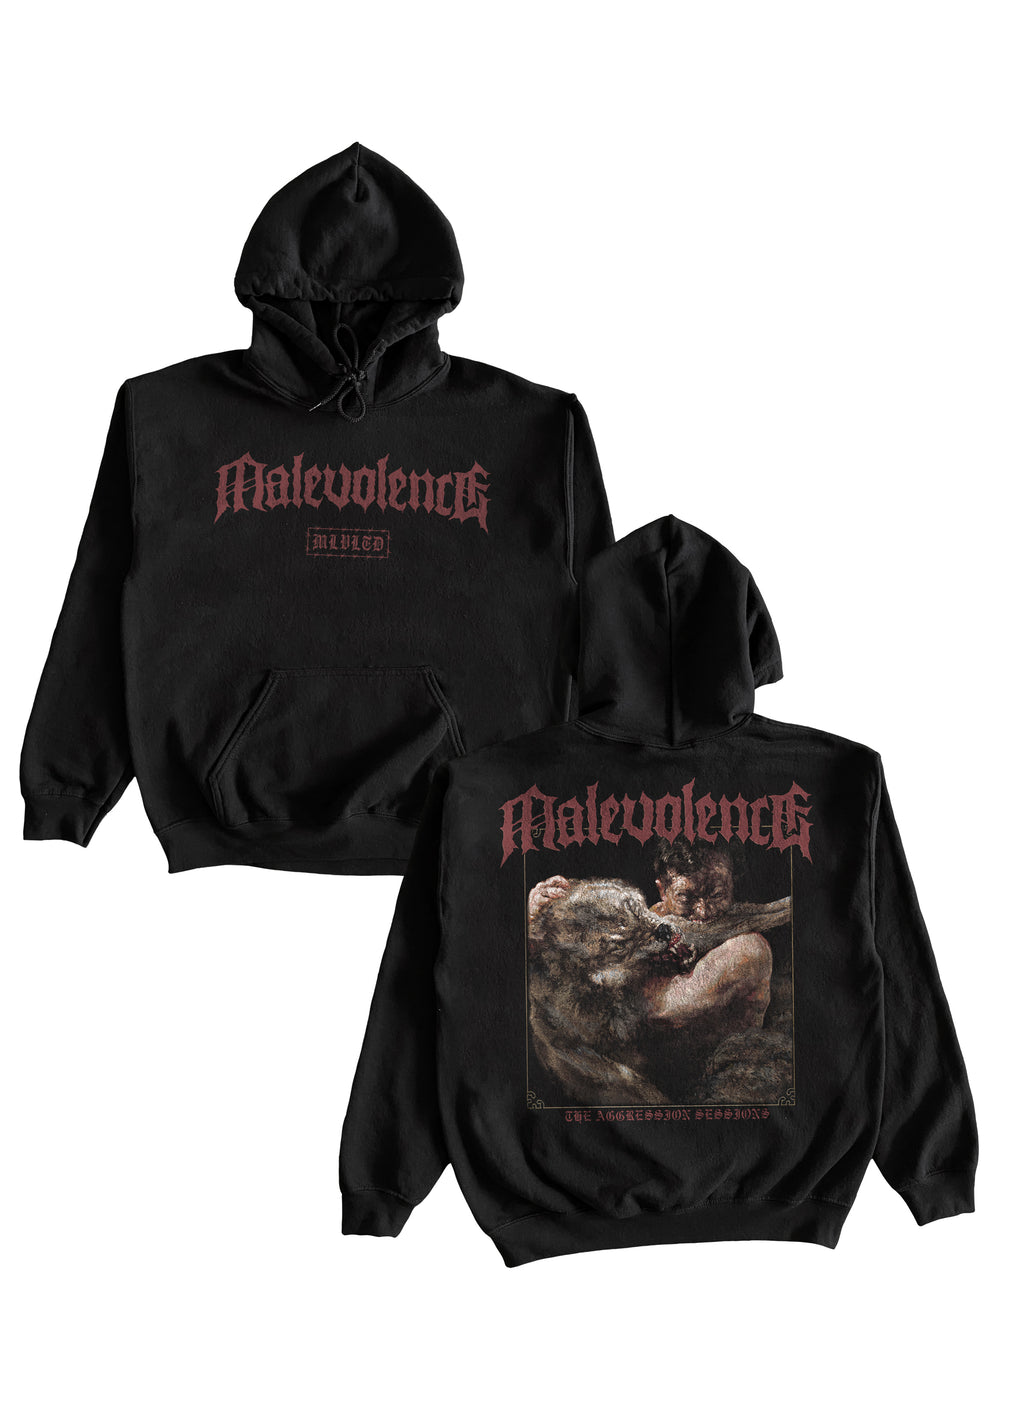 Malevolence - The Aggression Sessions Hoodie